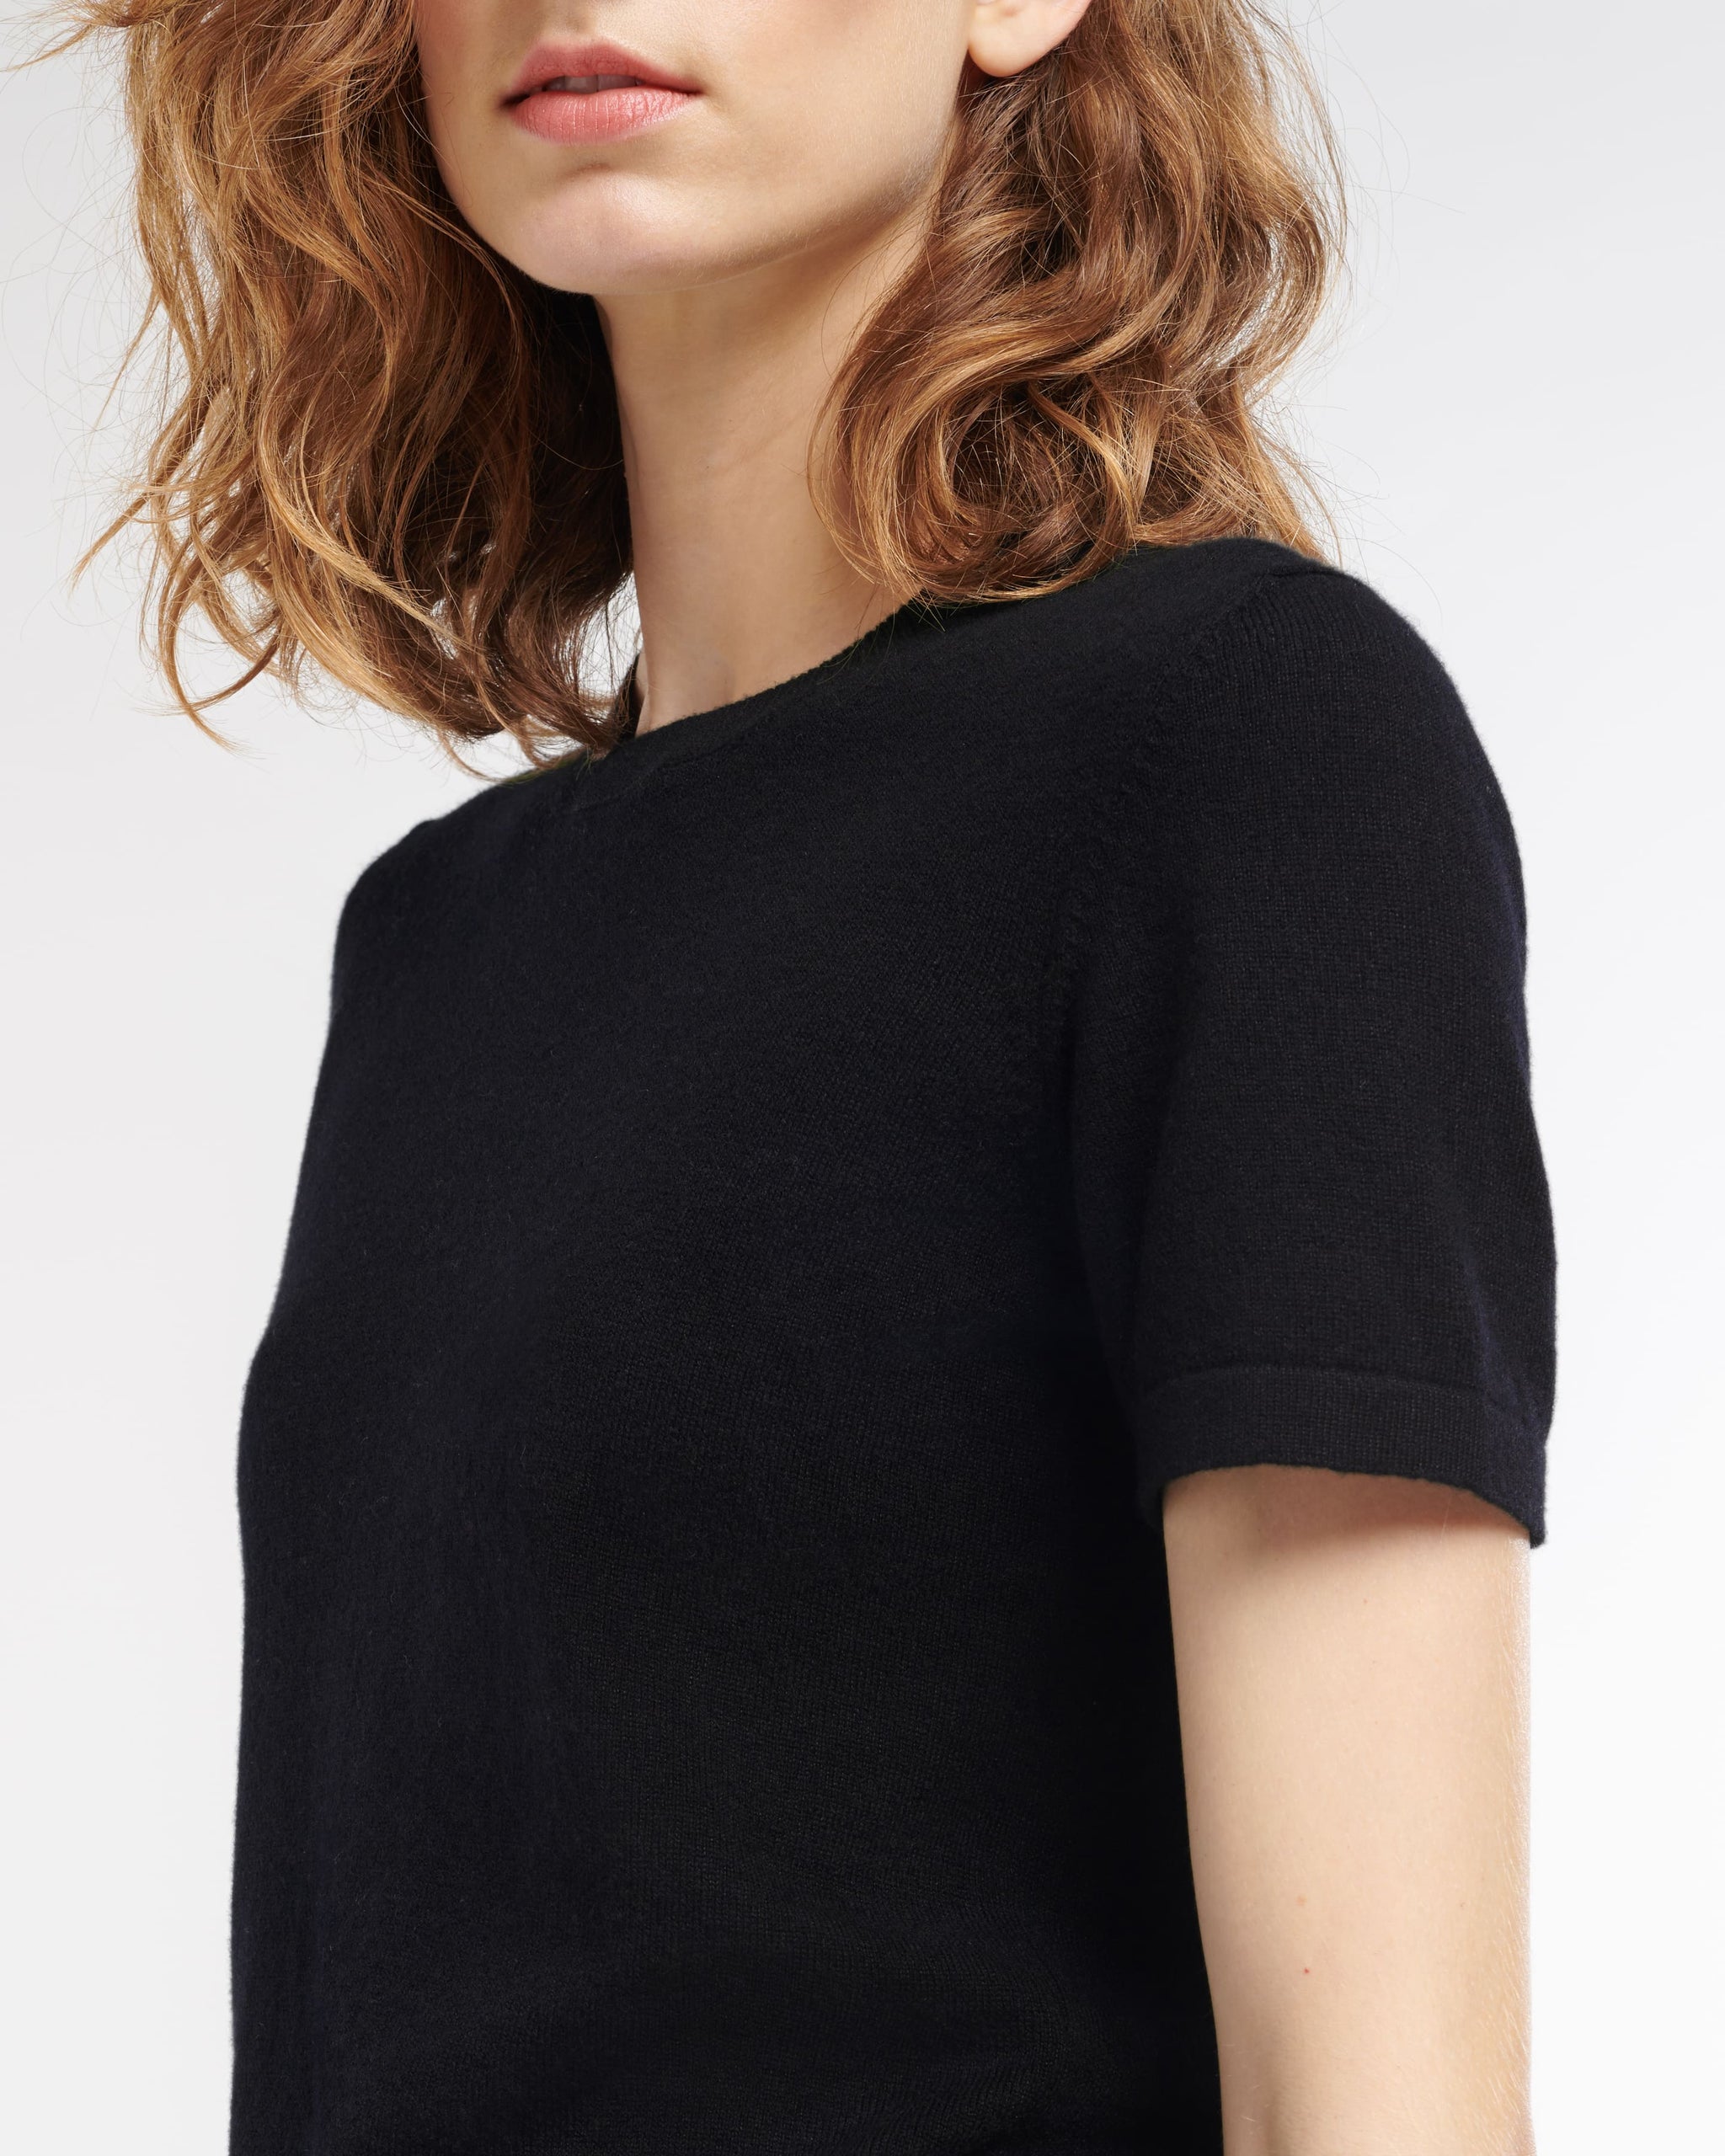 Cashmere tops and t-shirts for women – Page 2 – Barrie.com